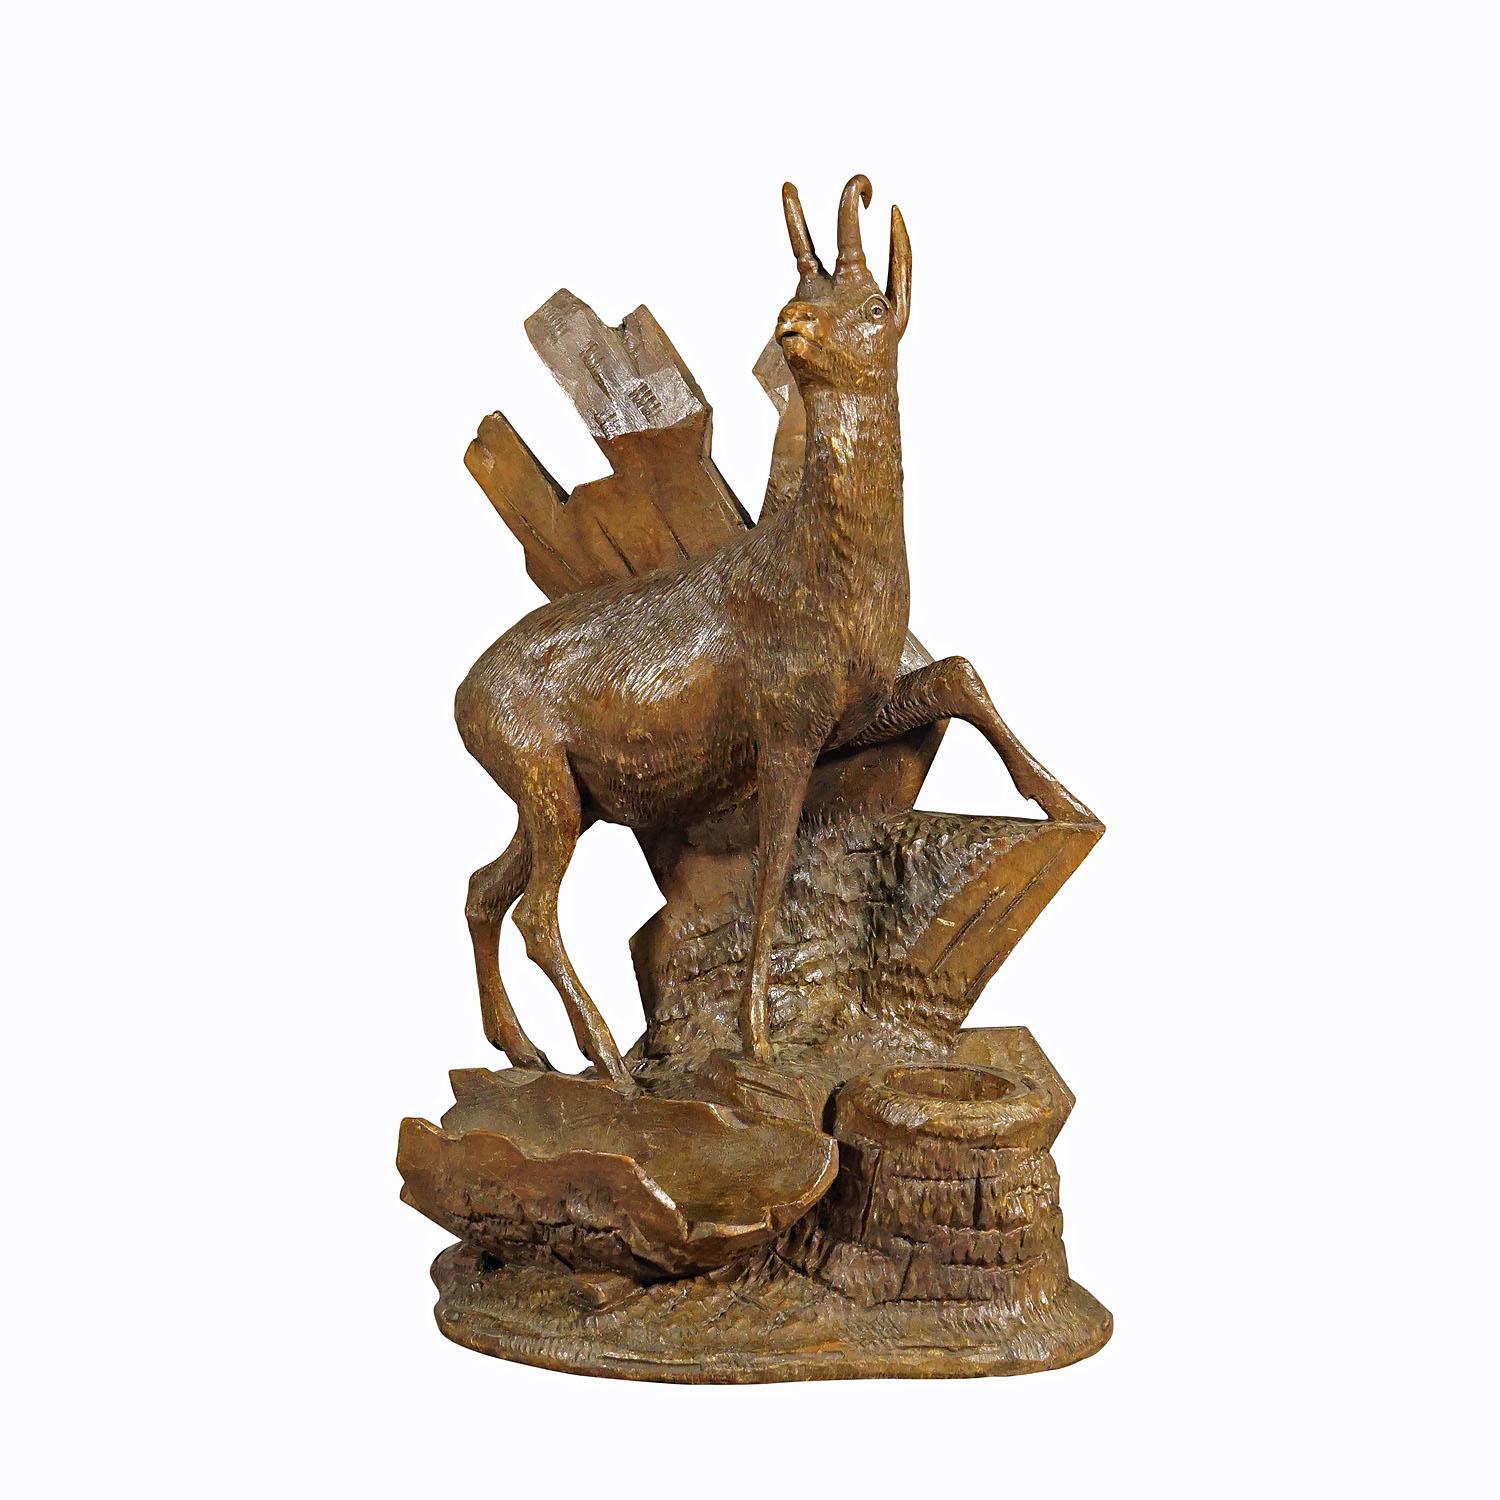 Finely carved wood chamois Brienz, Switzerland circa 1900.

A delicately handcarved wood sculpture of a chamois standing on a rocky base. A very detailed and natural carving excecuted by one of the Swiss woodcarvers from the area of Brienz, ca.